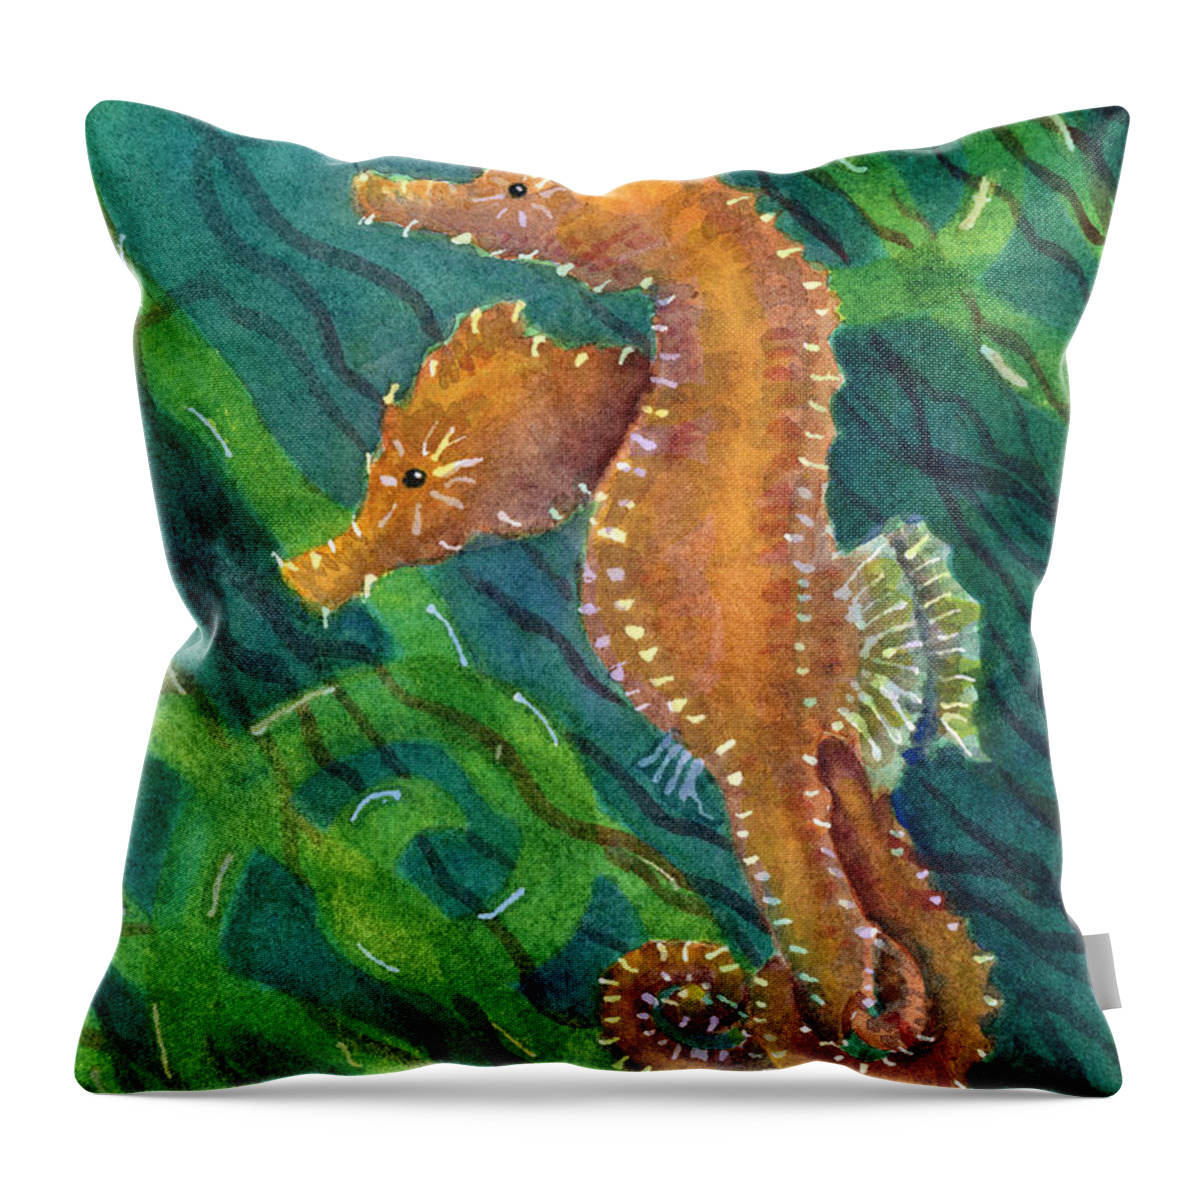 Seahorse Throw Pillow featuring the painting Two By Sea by Amy Kirkpatrick